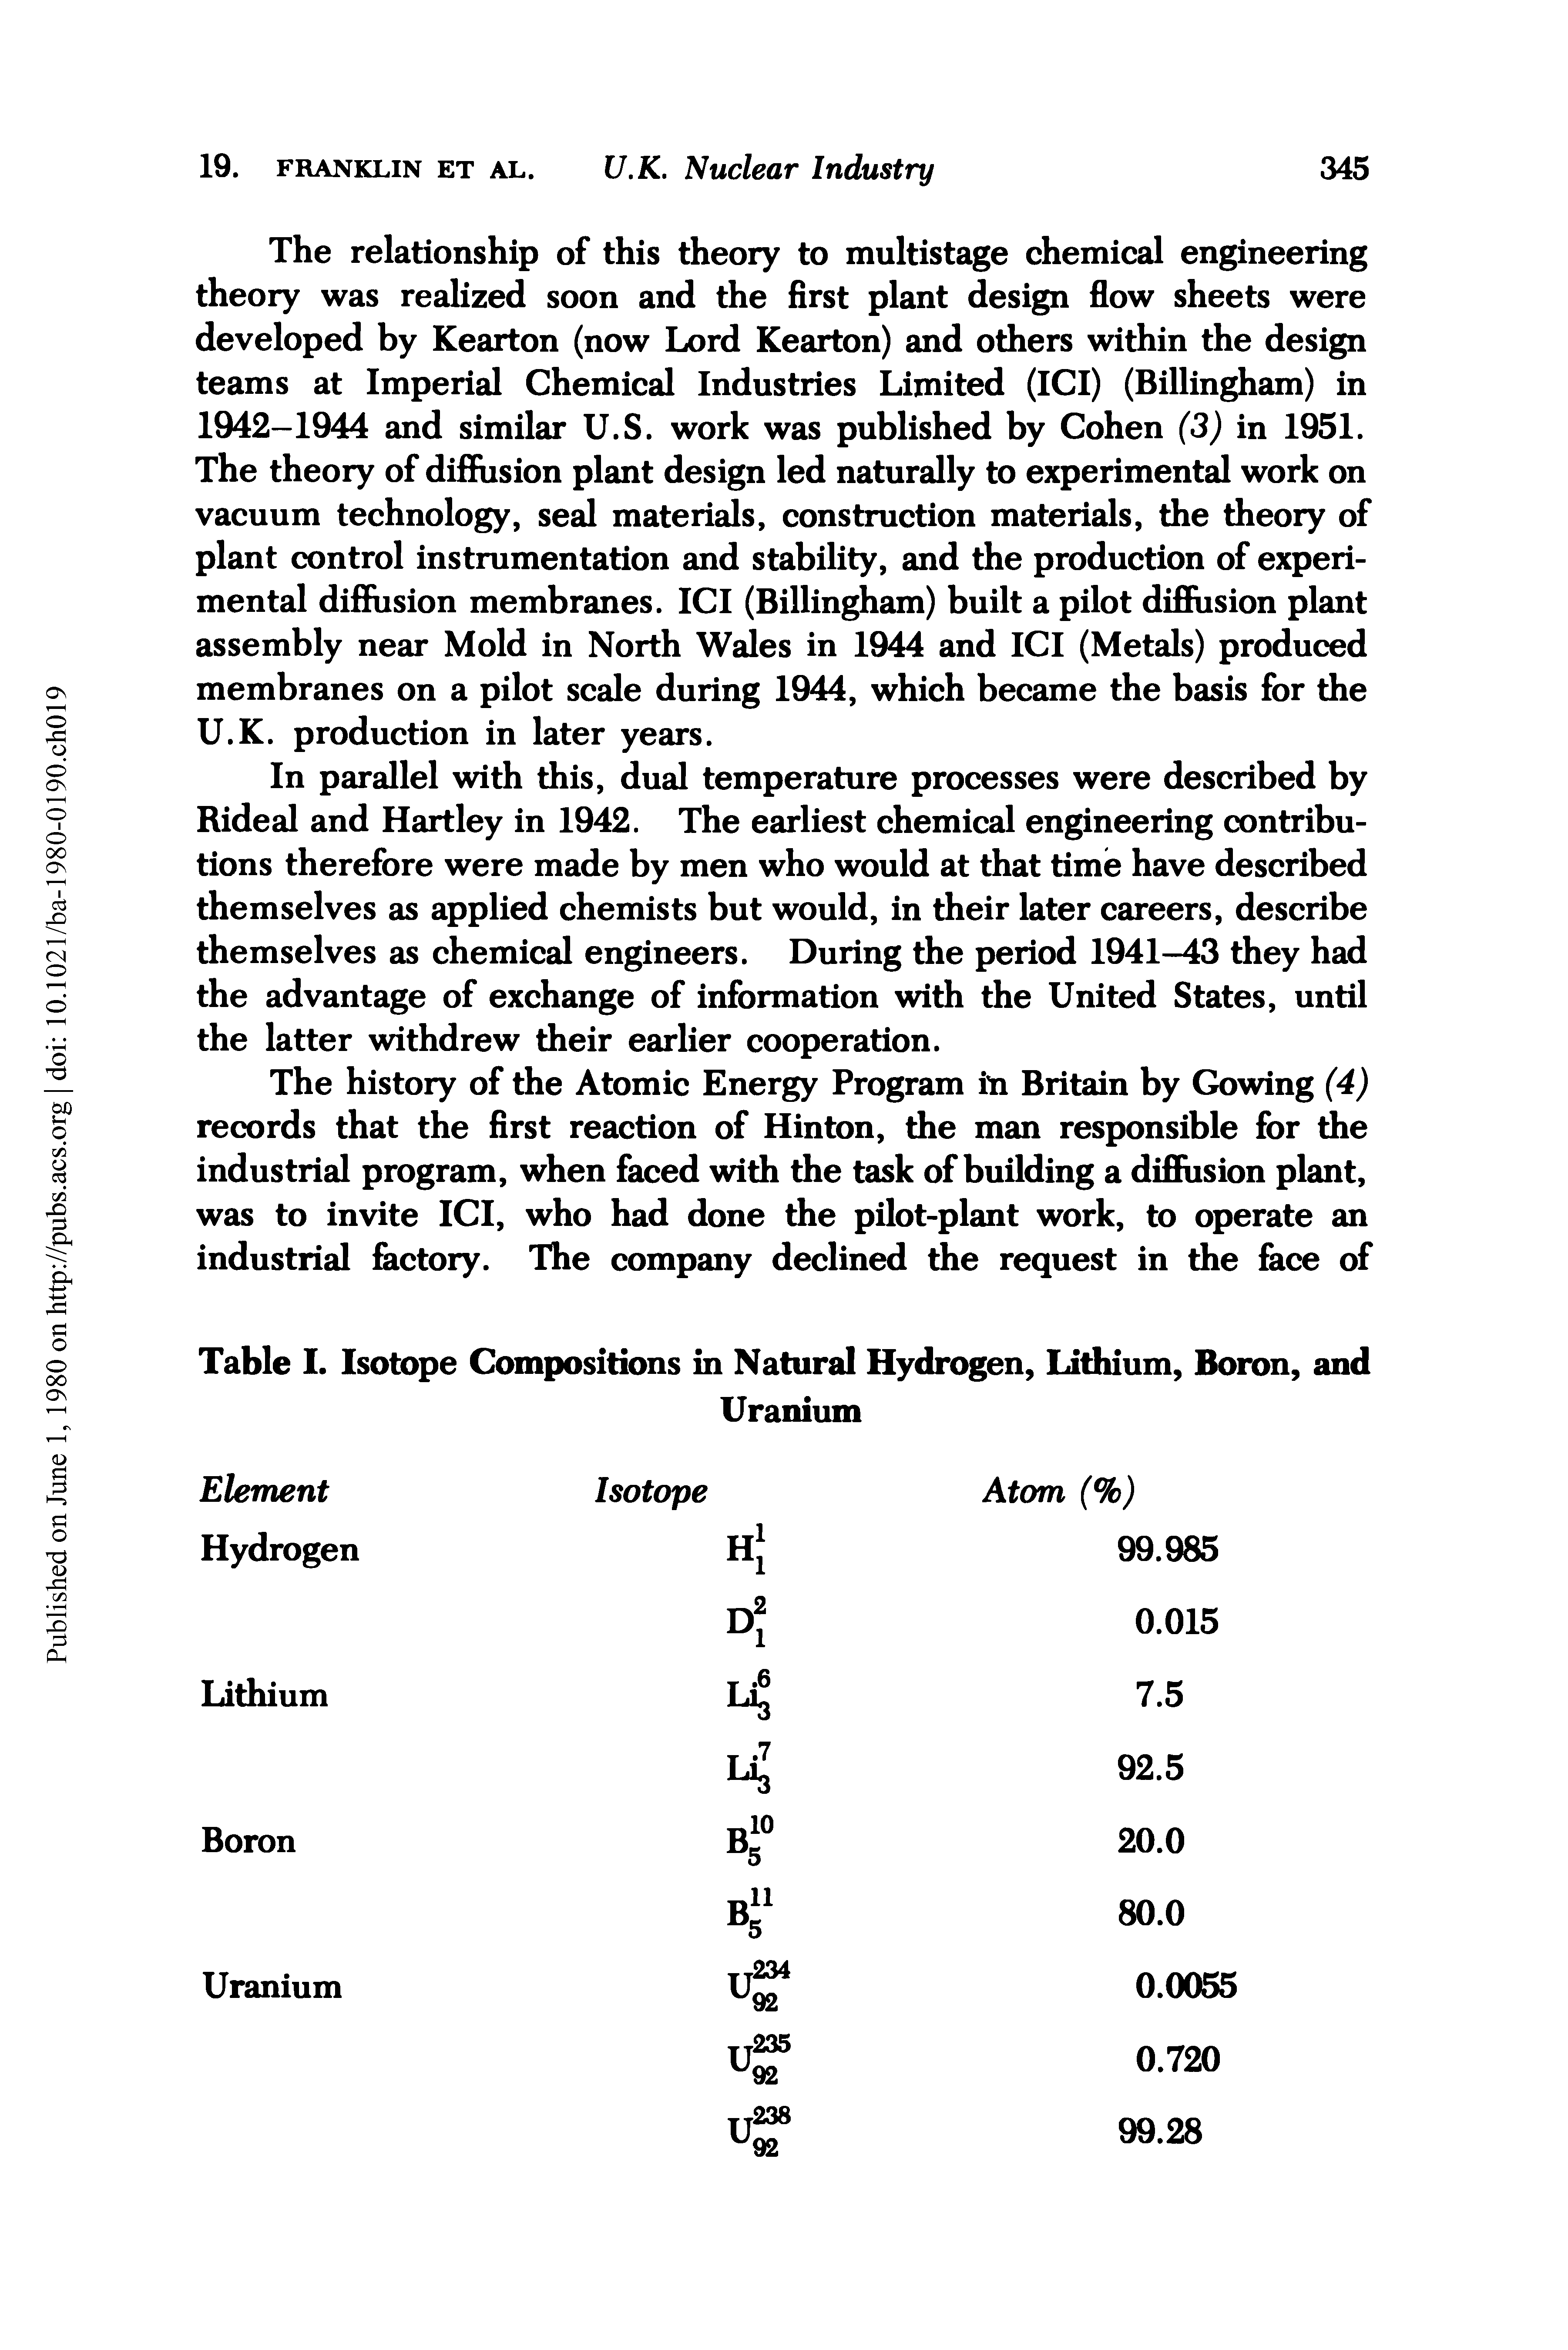 Table I. Isotope Compositions in Natural Hydrogen, Lithium, Boron, and...